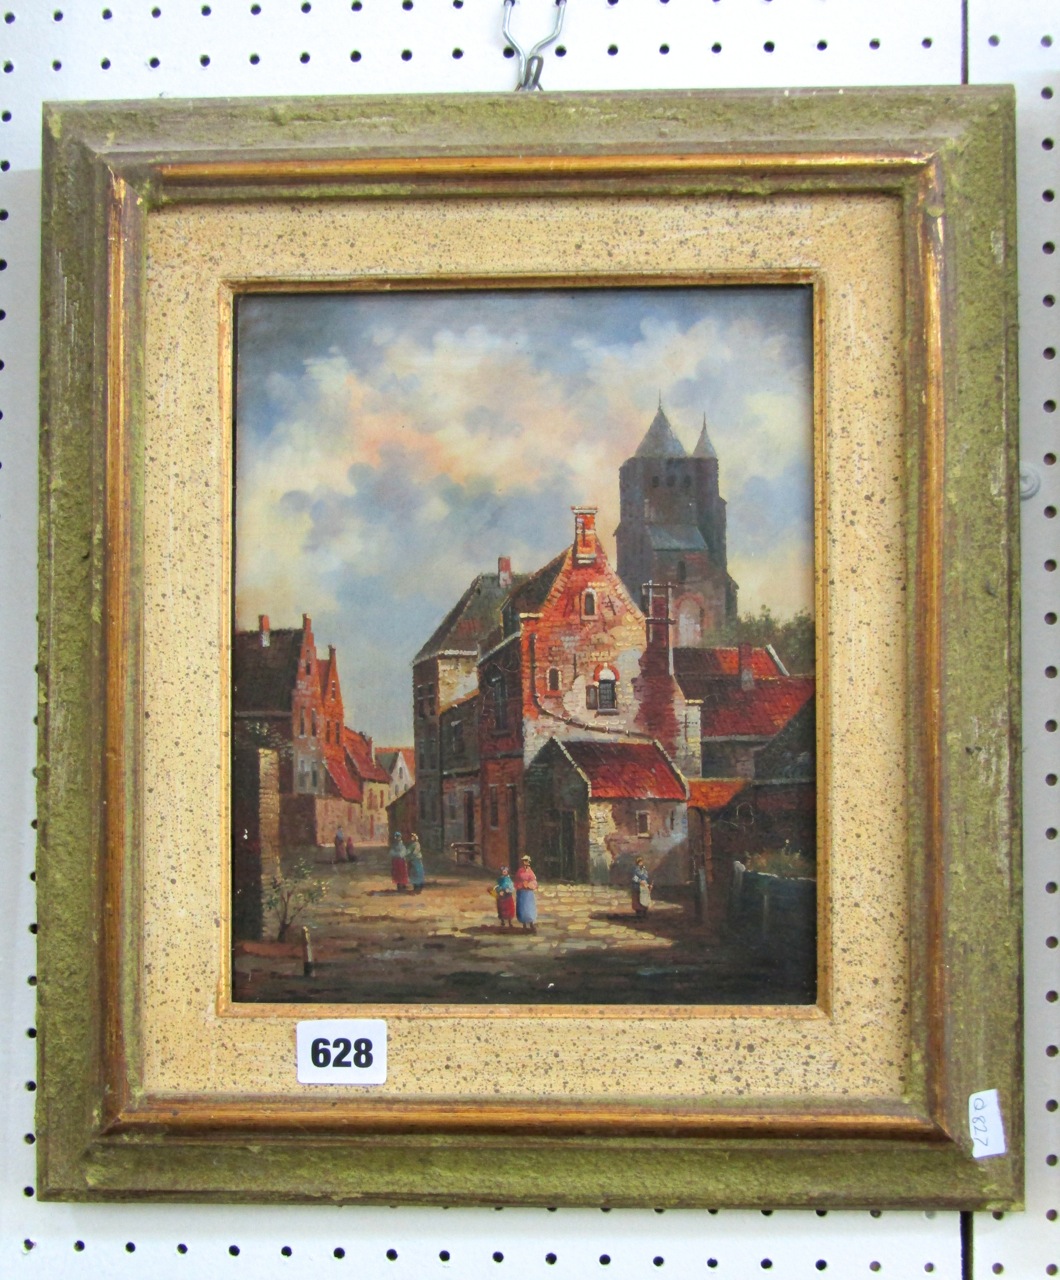 A 20th century oil painting on board in the 19th century manner showing a continental street scene